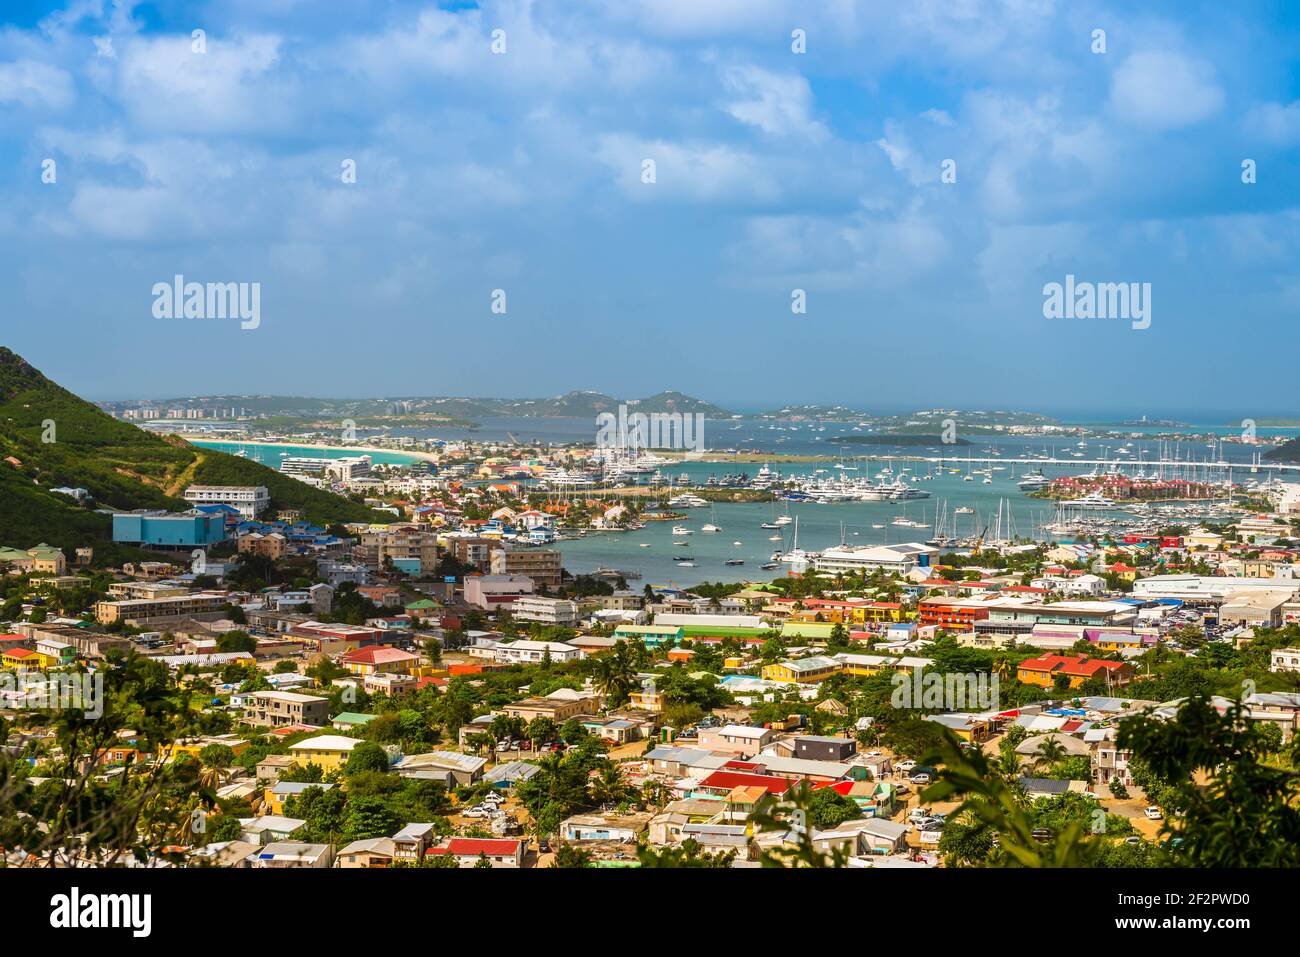 Aerial view of Cay bay on the island of Saint Martin in the Caribbean Stock Photo